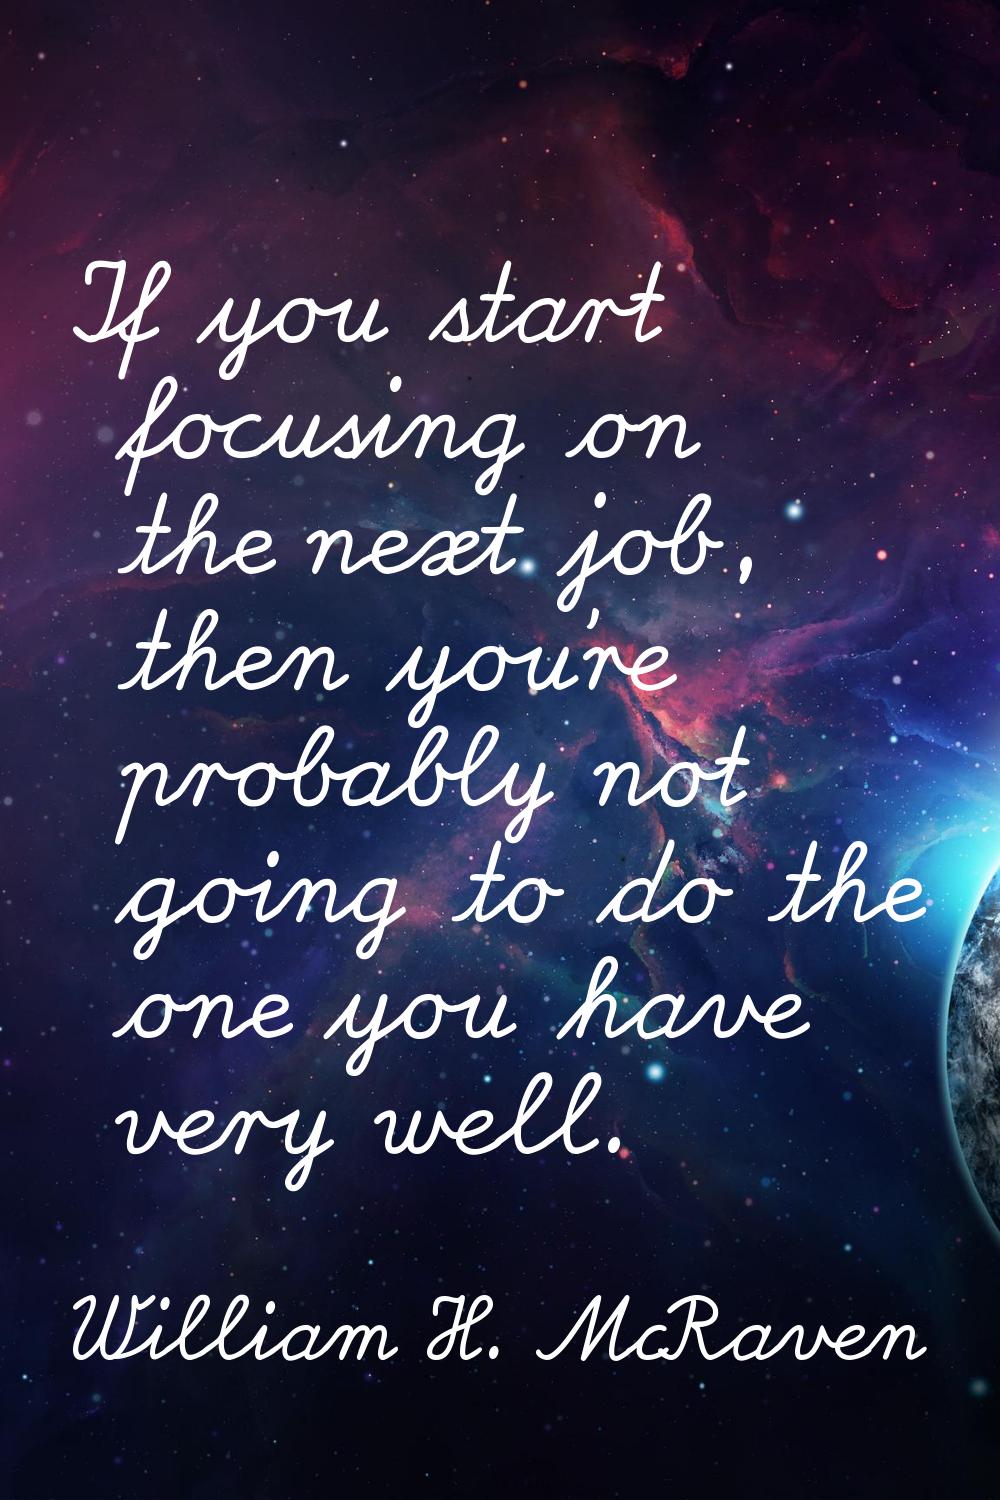 If you start focusing on the next job, then you're probably not going to do the one you have very w